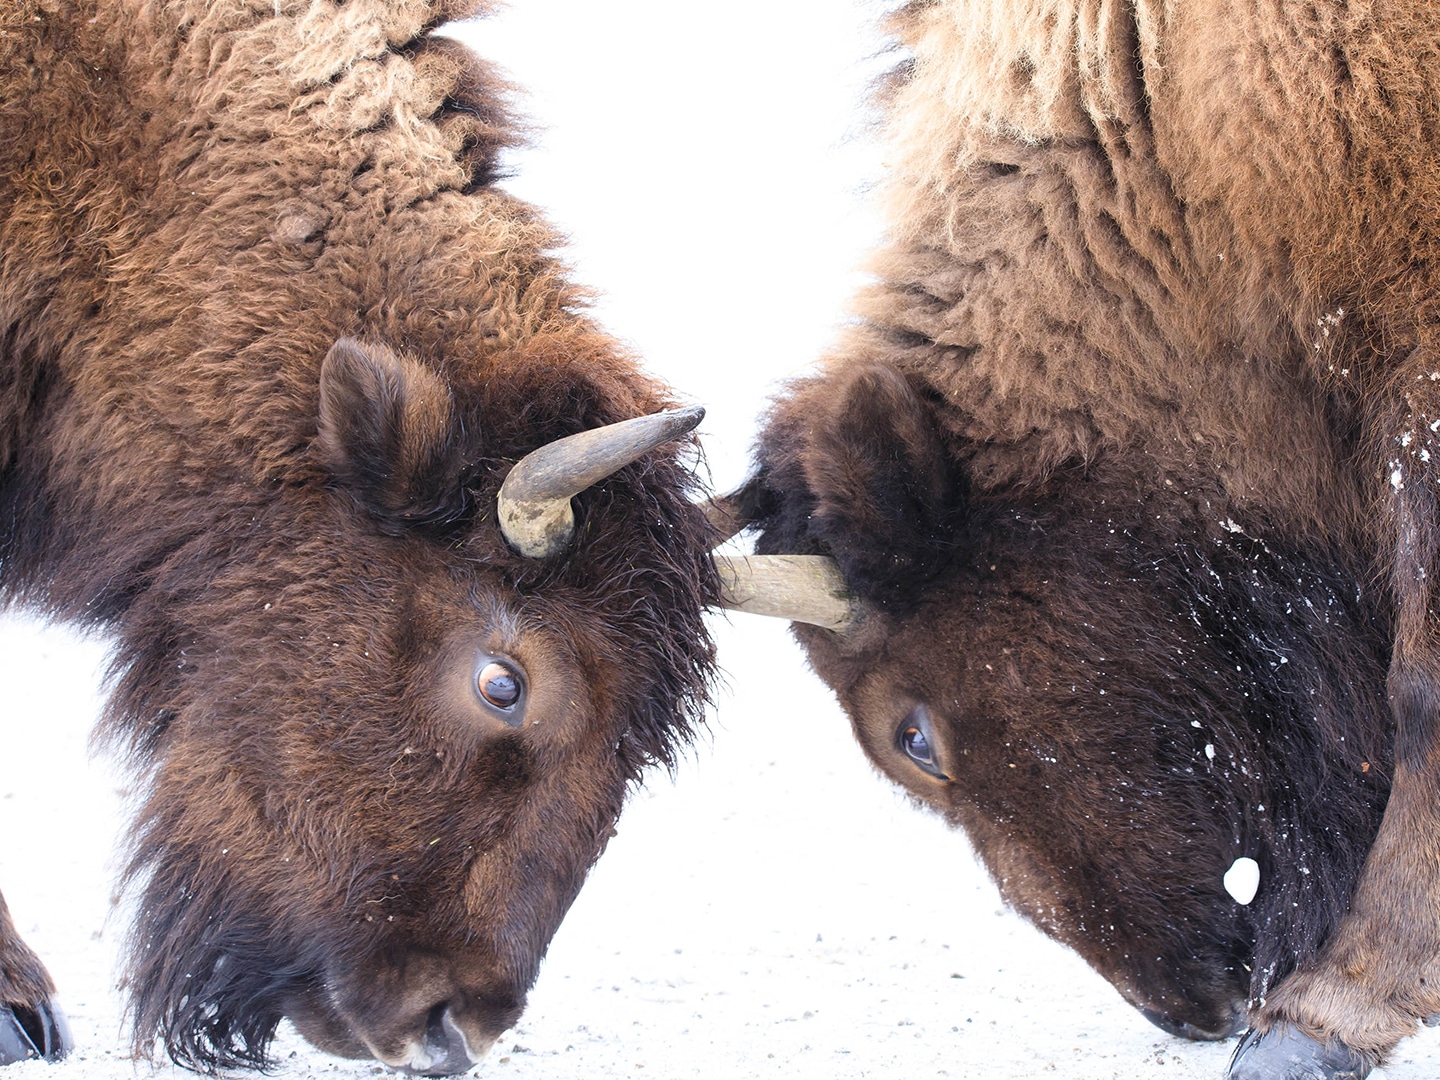 Two Bull Bison Spar With Horns In The Snow Covered Northern Range Of Yellowstone National Park